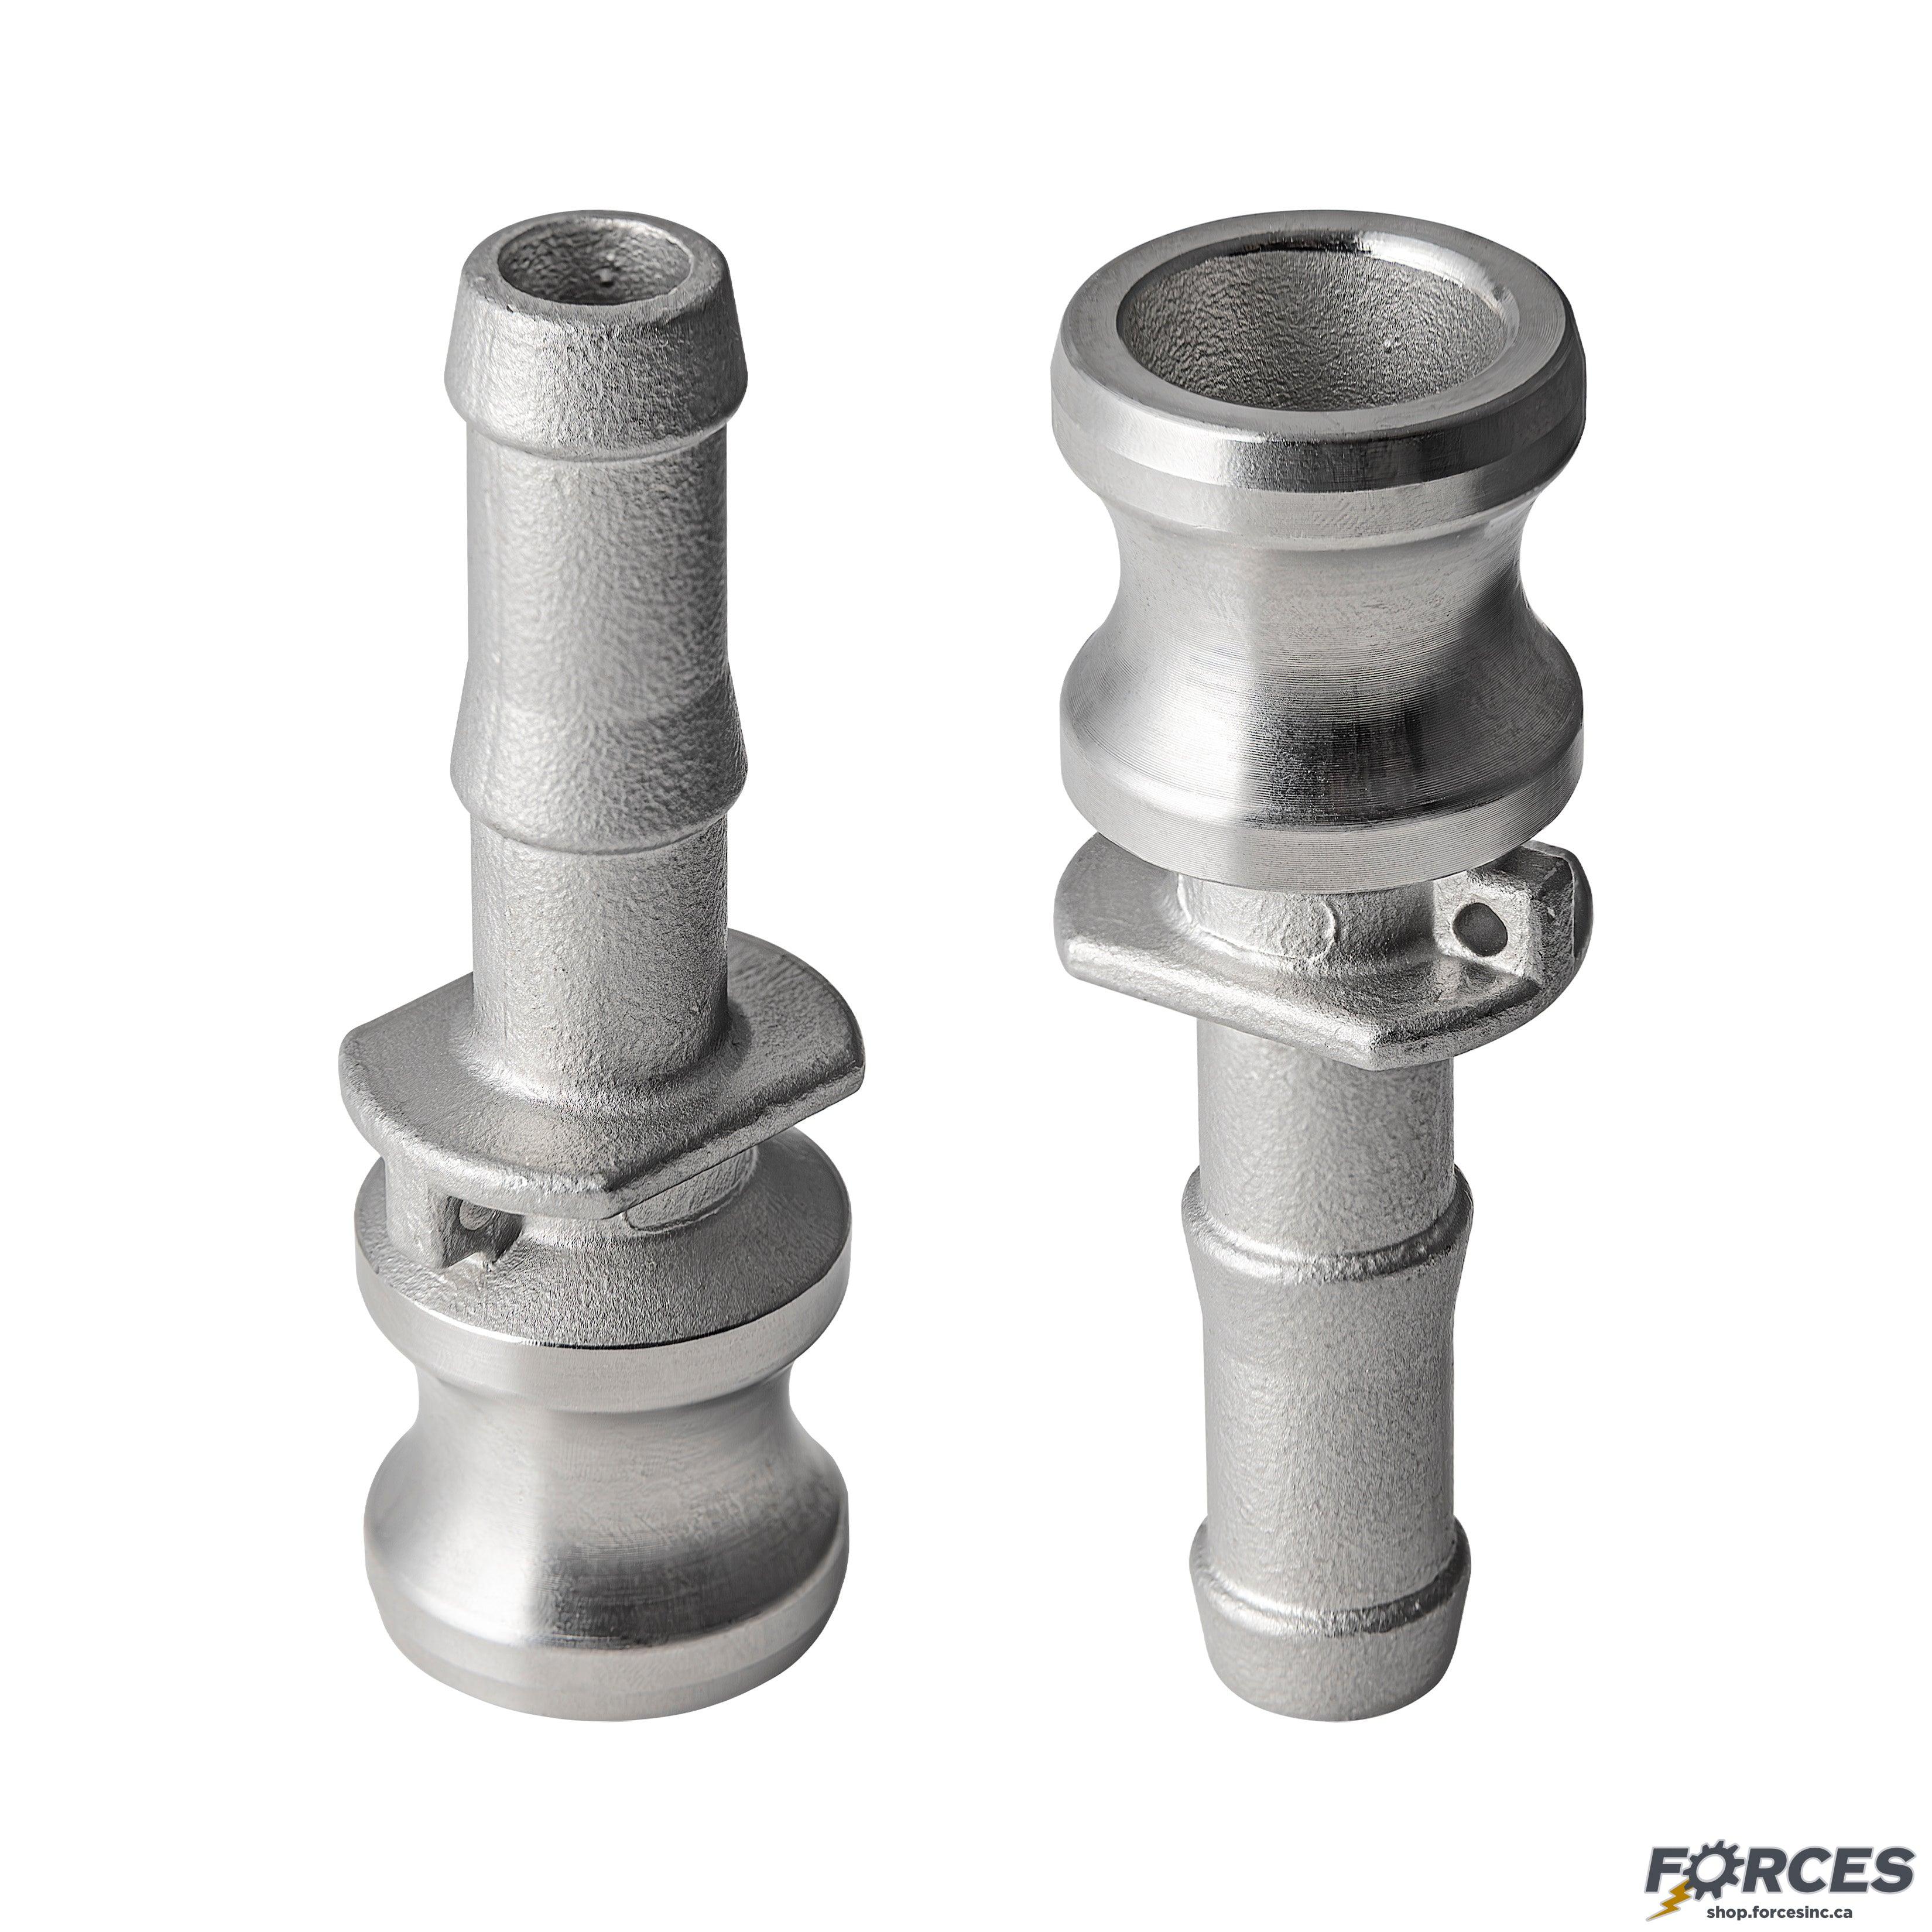 1-1/2" Type E Camlock Fitting Stainless Steel 316 - Forces Inc